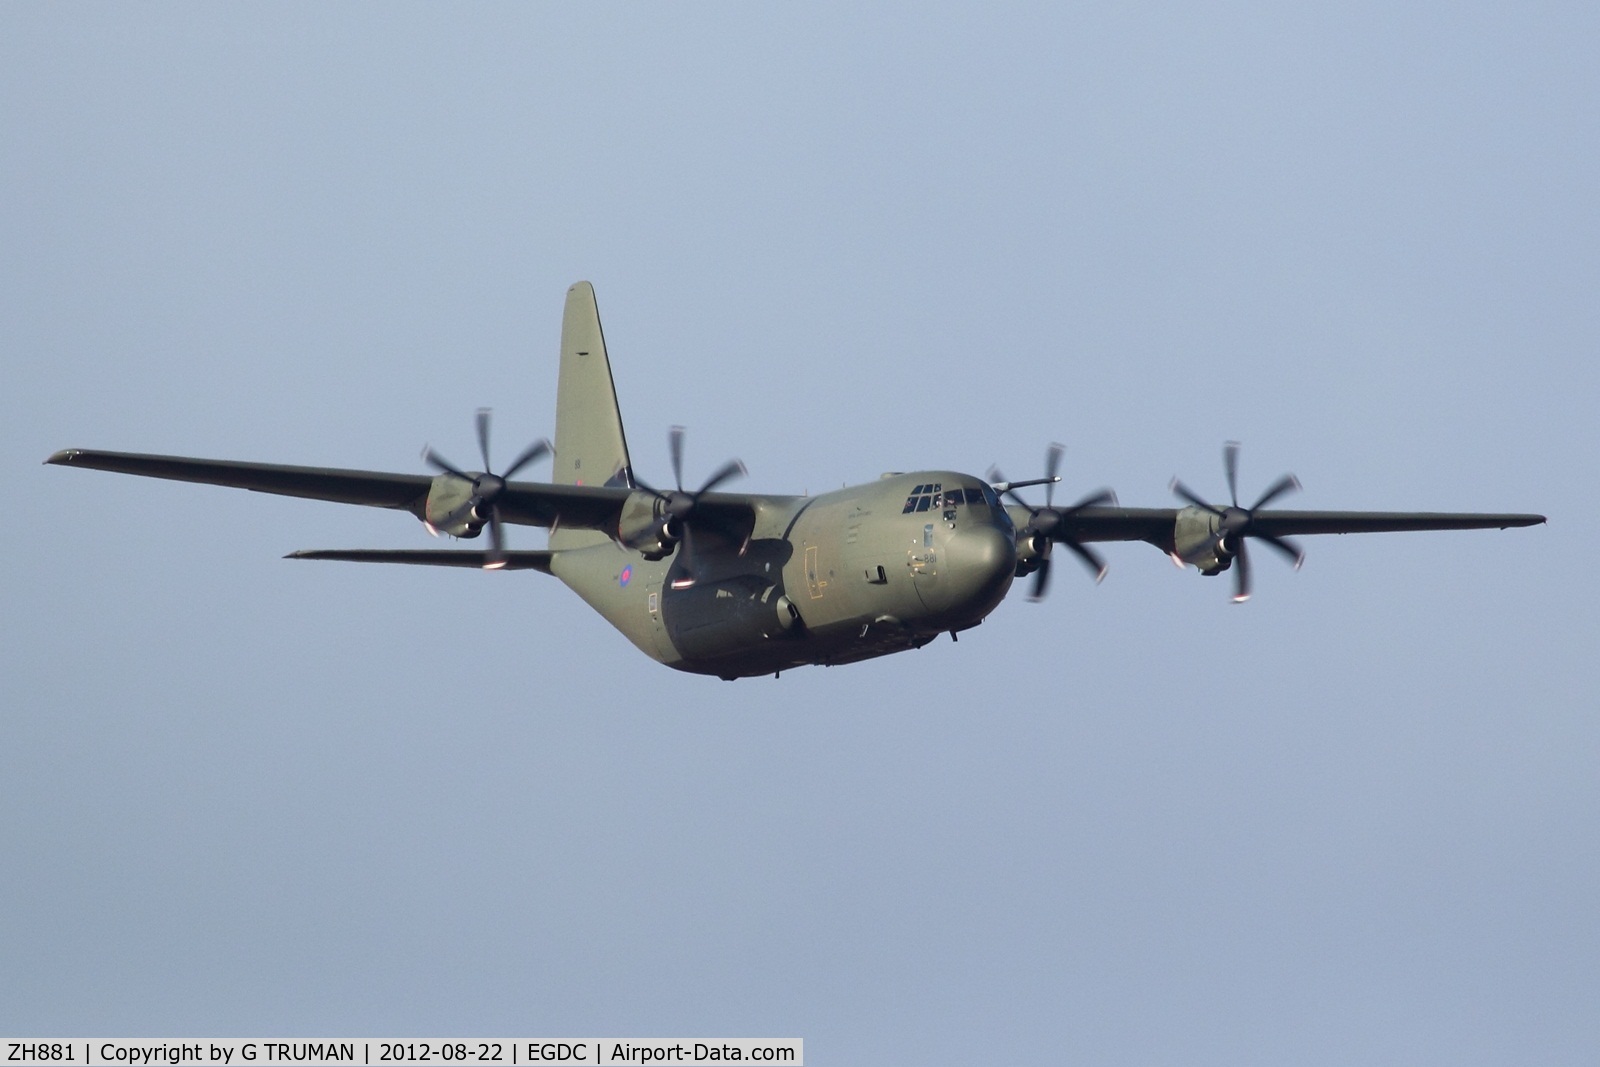 ZH881, 1999 Lockheed Martin C-130J Hercules C.5 C/N 382-5479, Left climb out from 27 after a low approach and overshoot